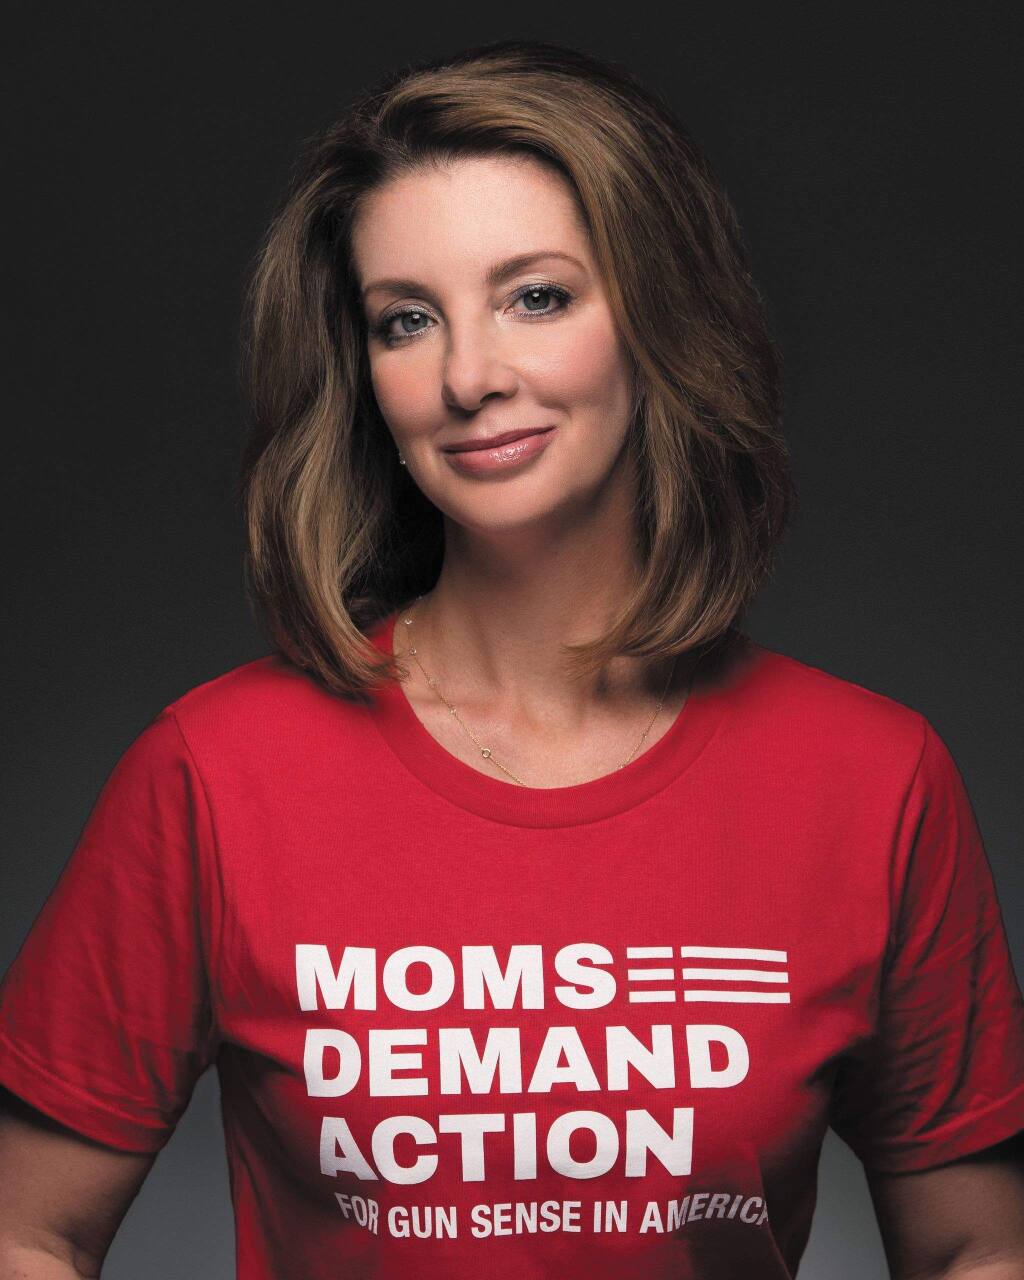 Shannon Watts, founder of Moms Demand Action and author of 'Fight Like a Mother,' will speak Tuesday, June 11, at the invitation of Sonoma Speaker Series.Photo by Christopher Langford